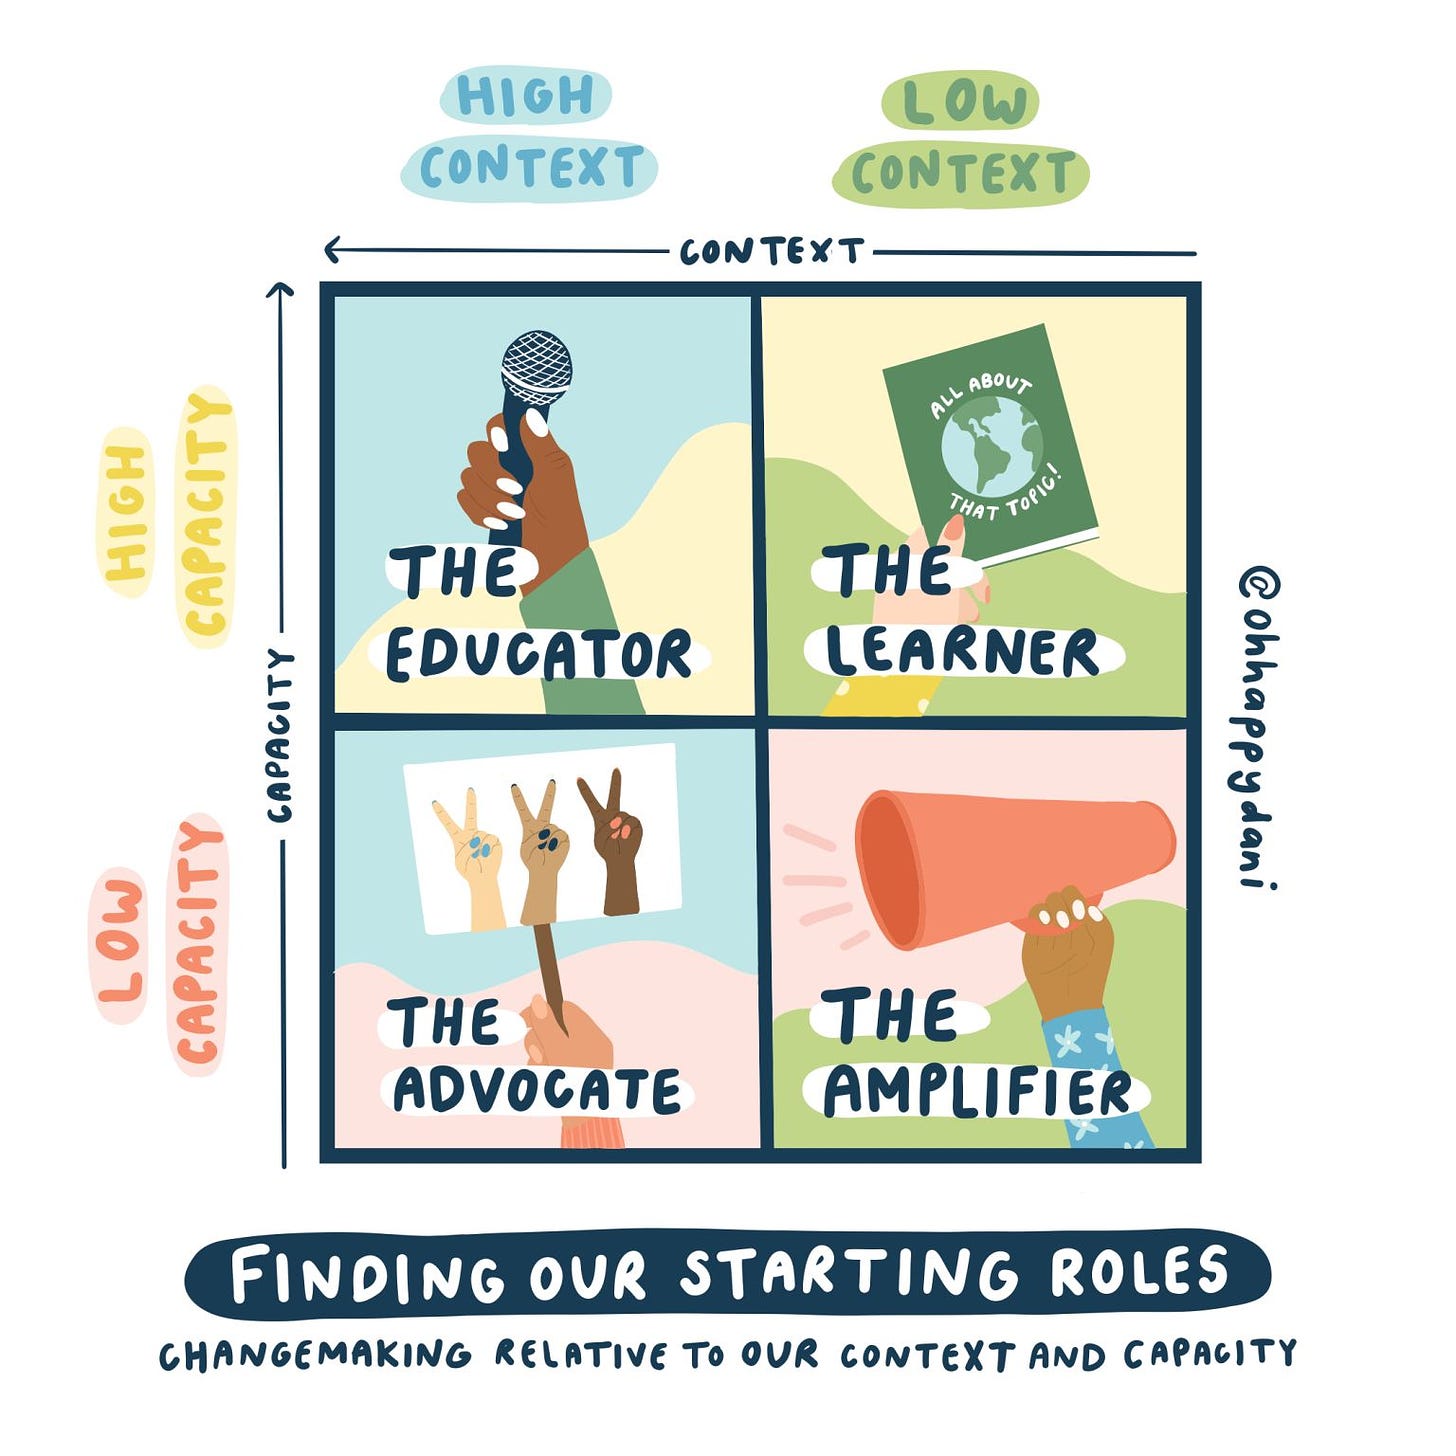 Finding Our Starting Roles - Illustration by Danielle Coke